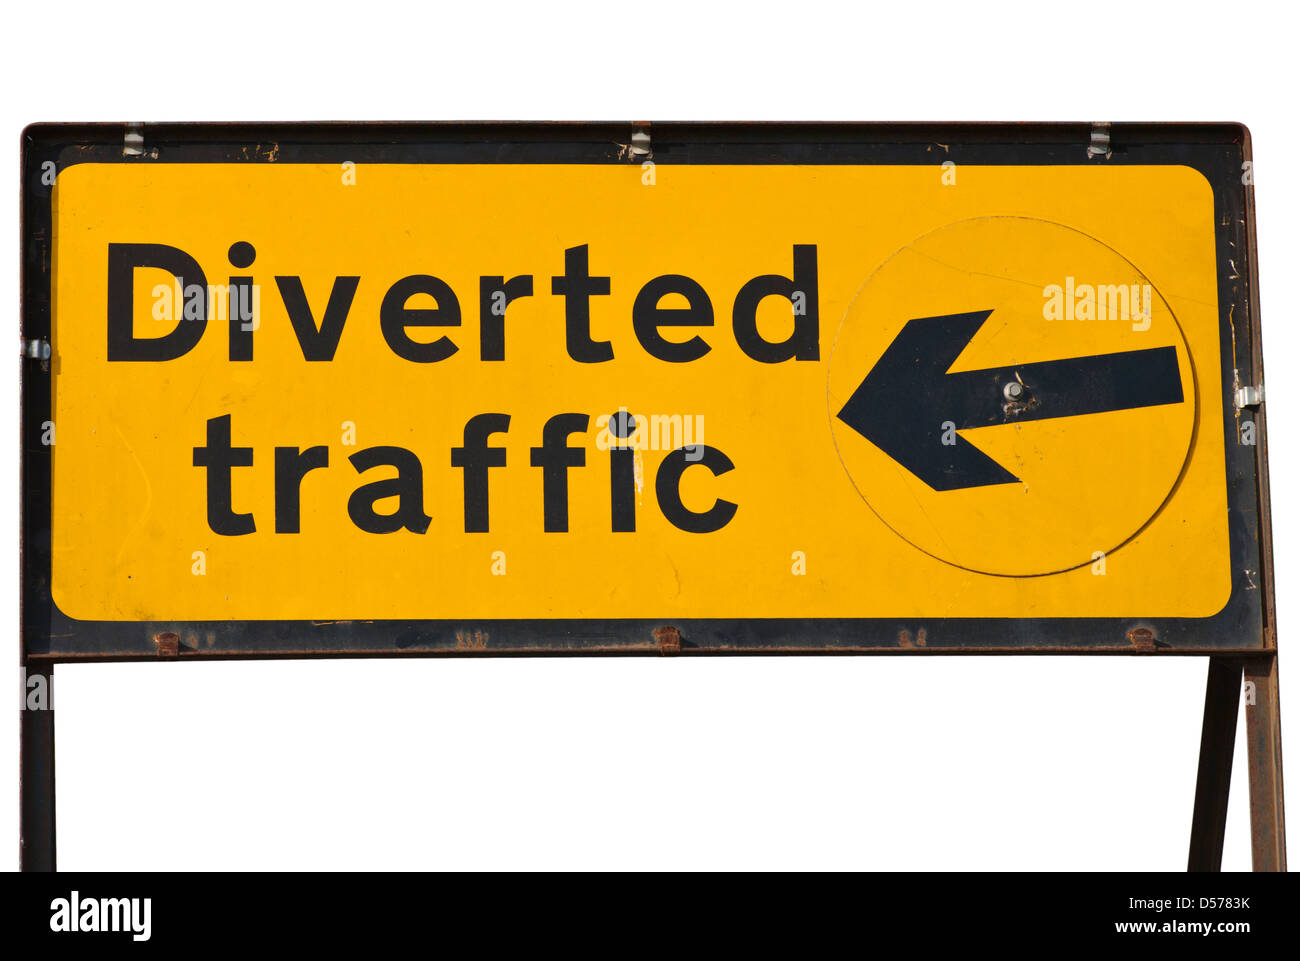 Diverted Traffic Road Sign UK Diversion Road Signs Stock Photo